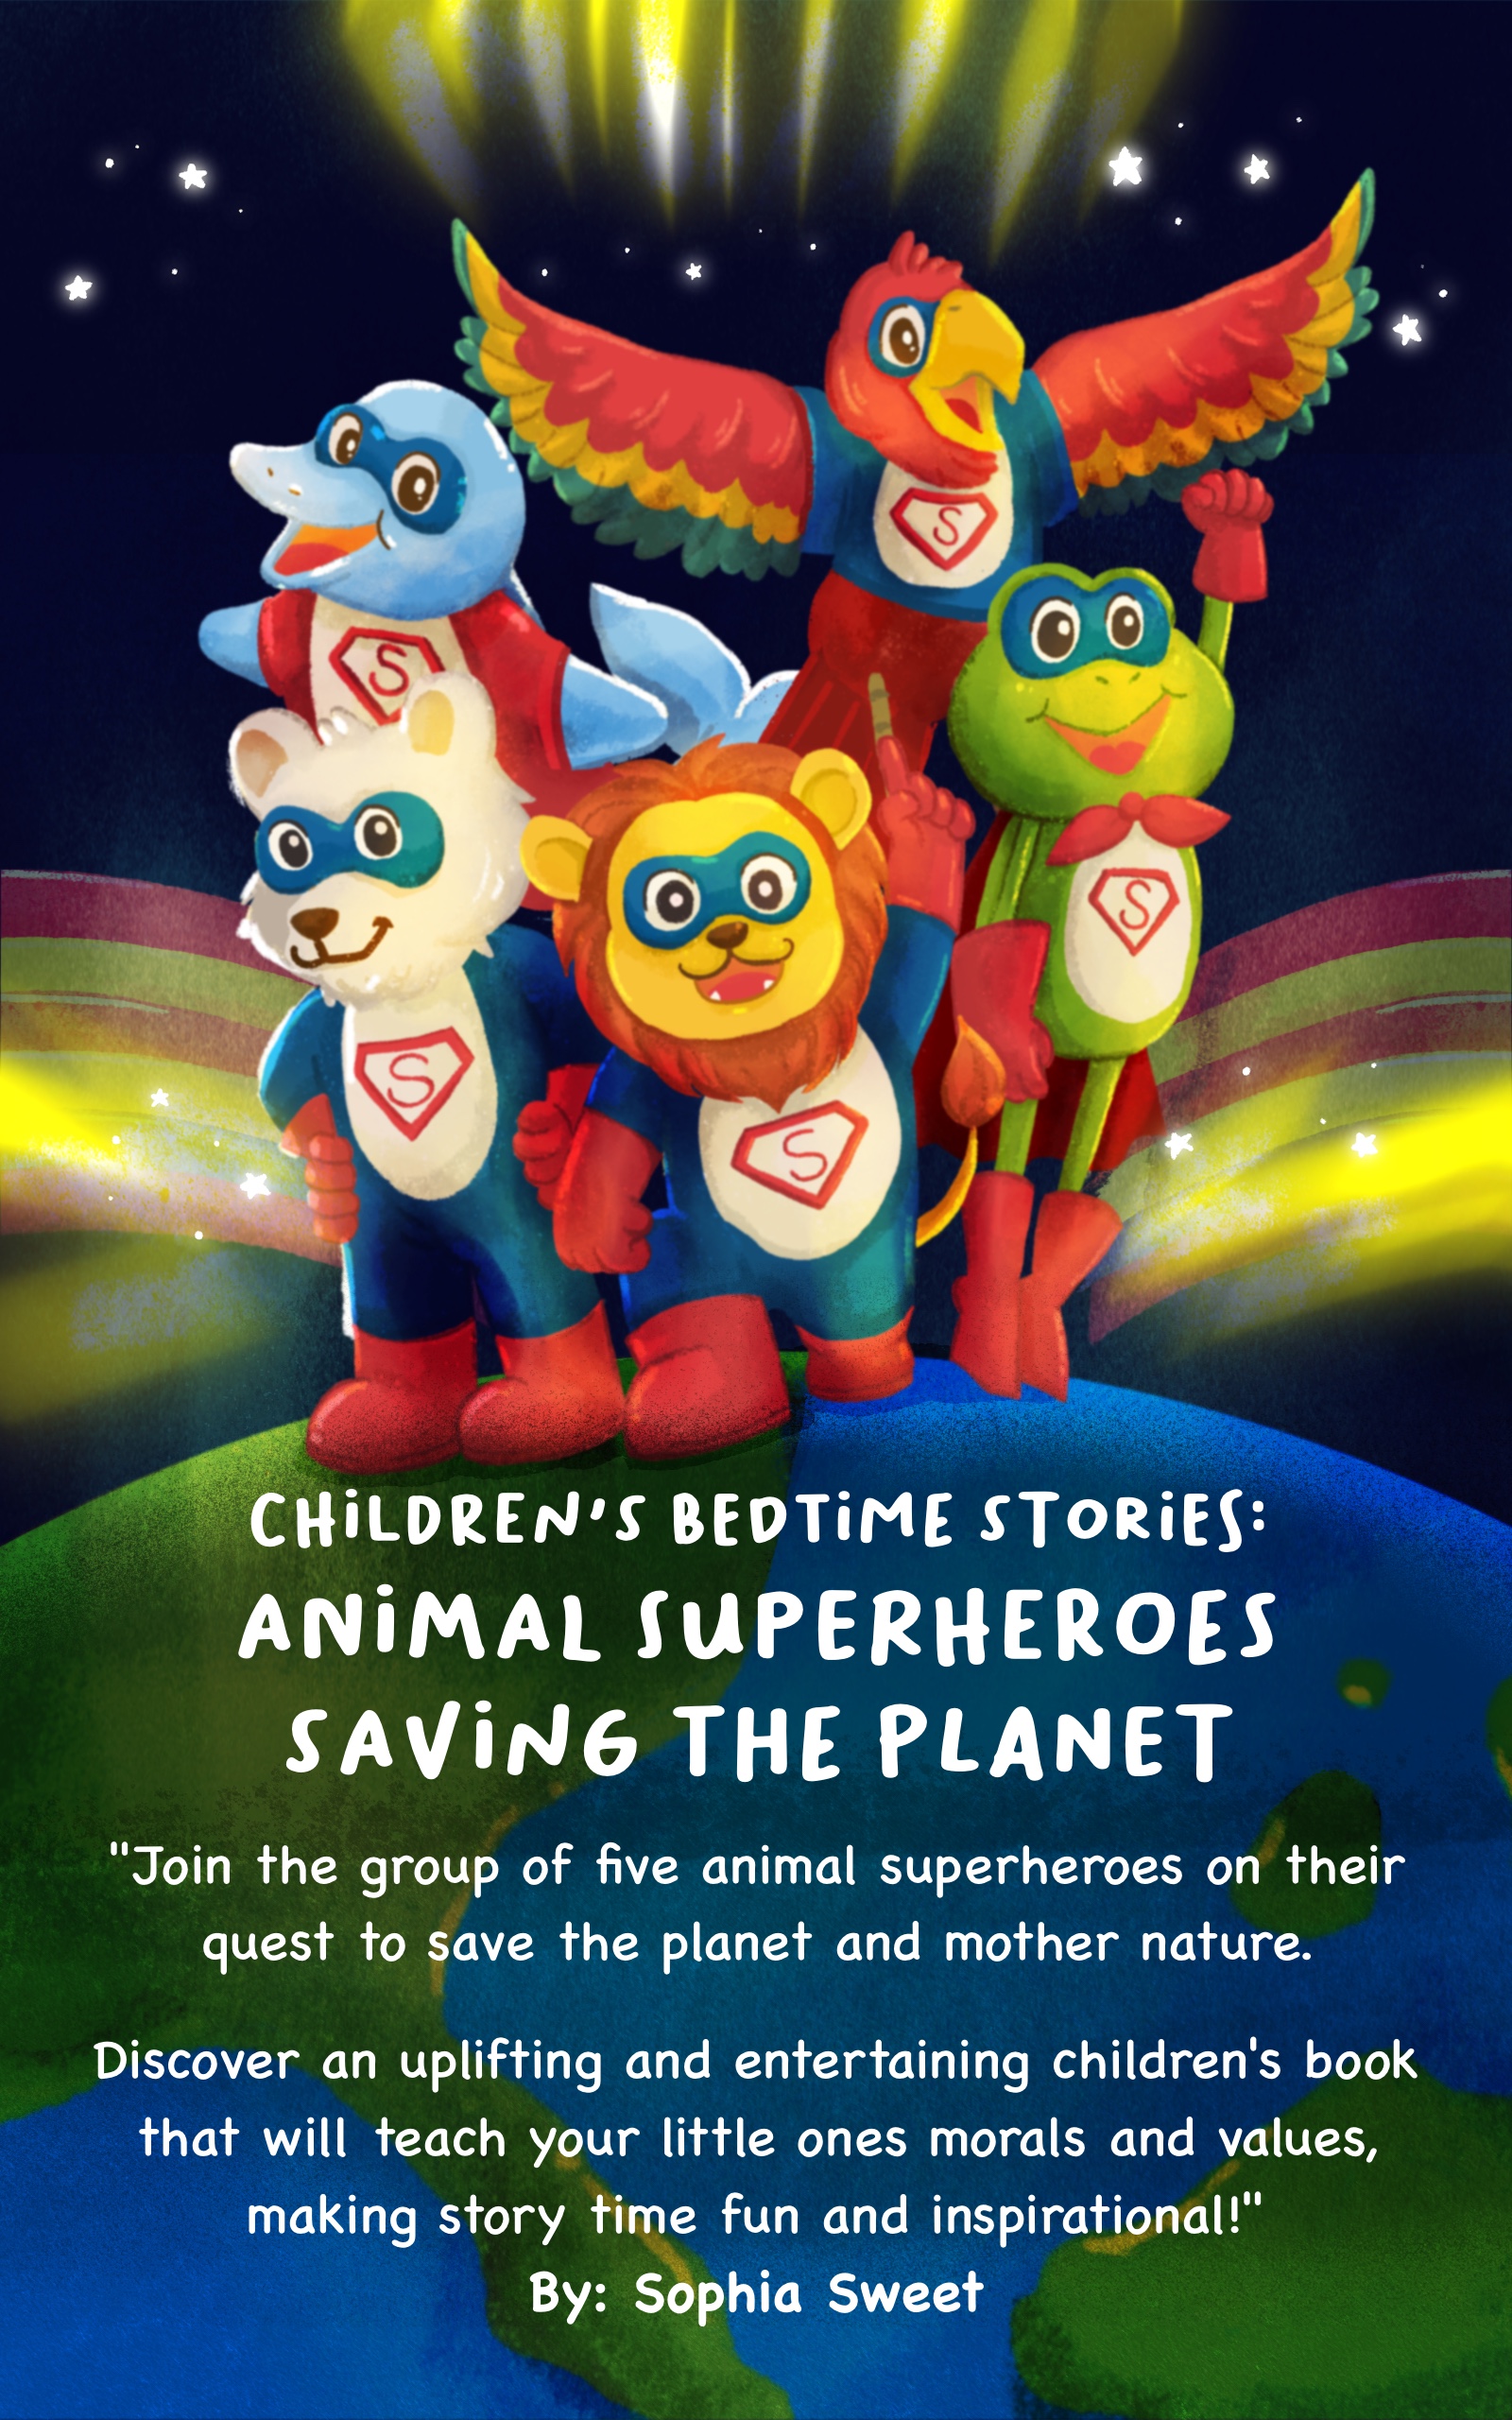 FREE: Children’s Bedtime Stories: Animal Superheroes Saving the Planet: Children’s Educational Bedtime Stories About Five Superhero Animals and a Magical Unicorn Teaming Up to Save the Planet by Sophia Sweet